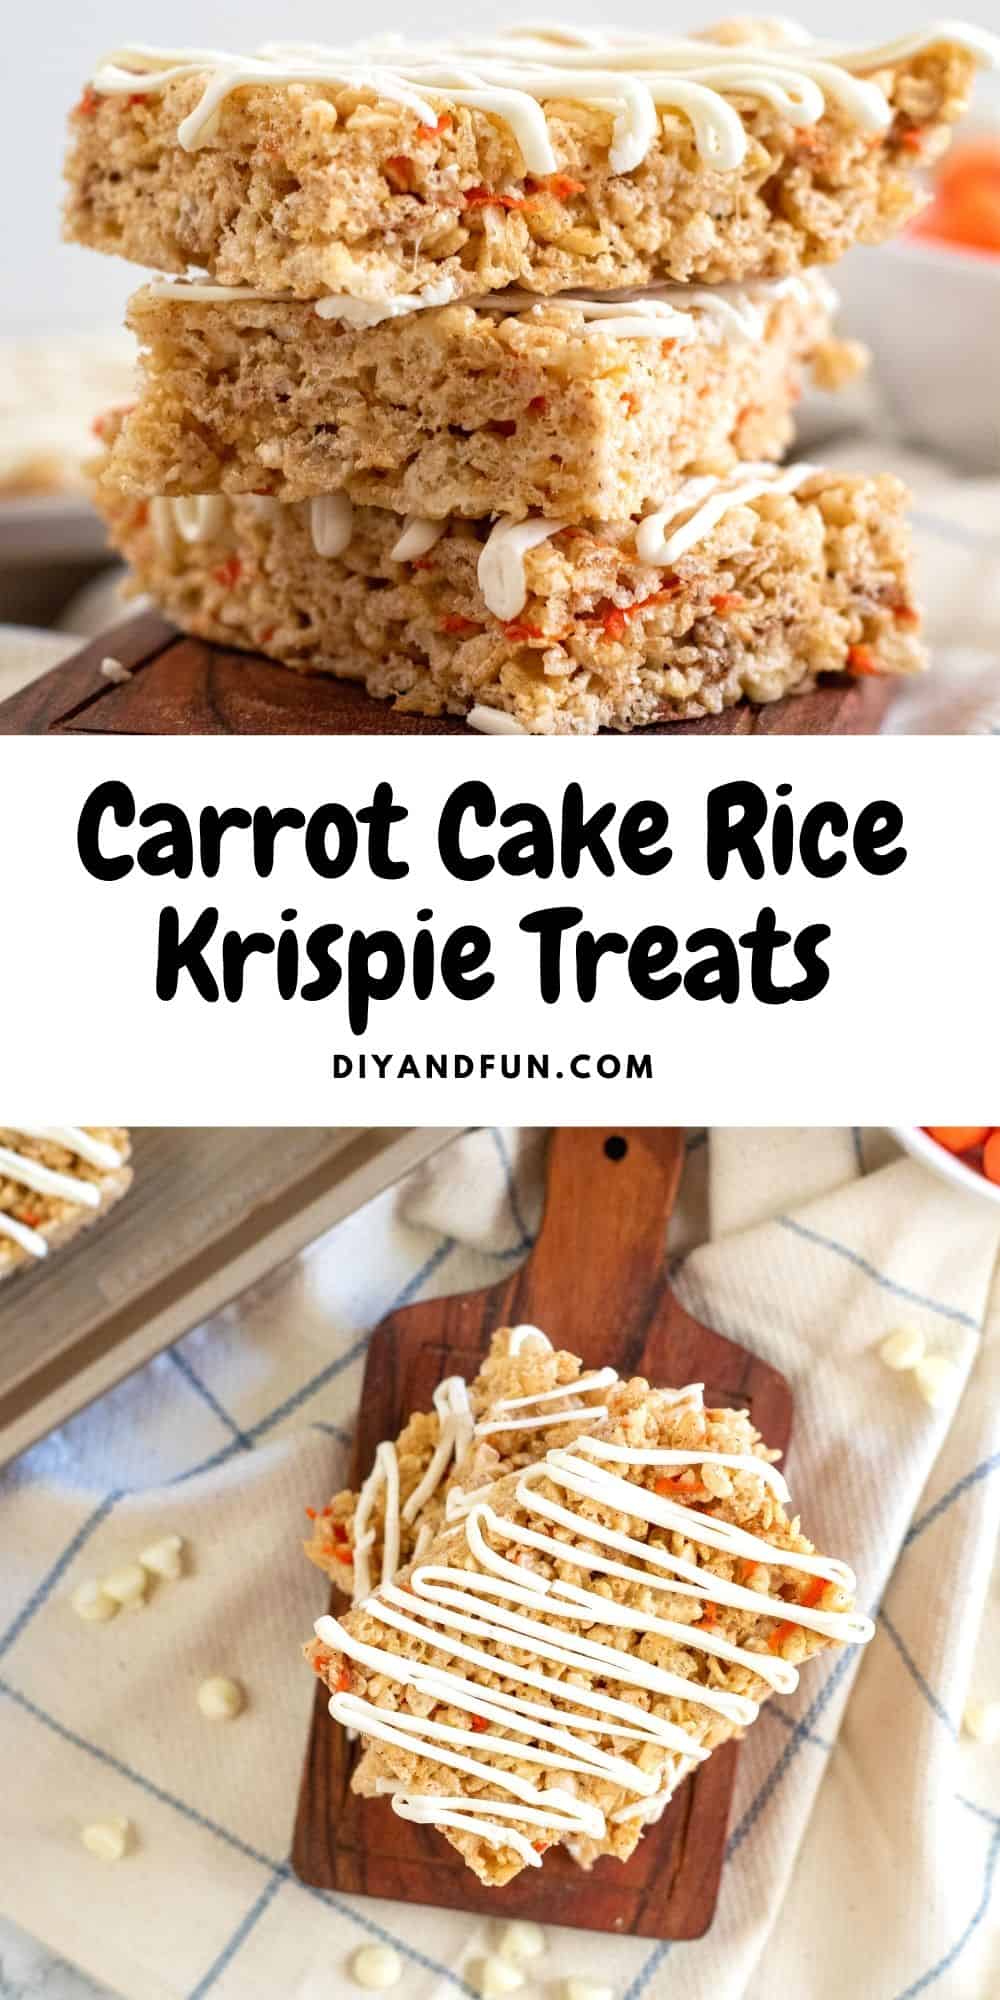 Carrot Cake Rice Krispie Treats, a yummy recipe for a cereal based dessert treat that is flavored with carrots.